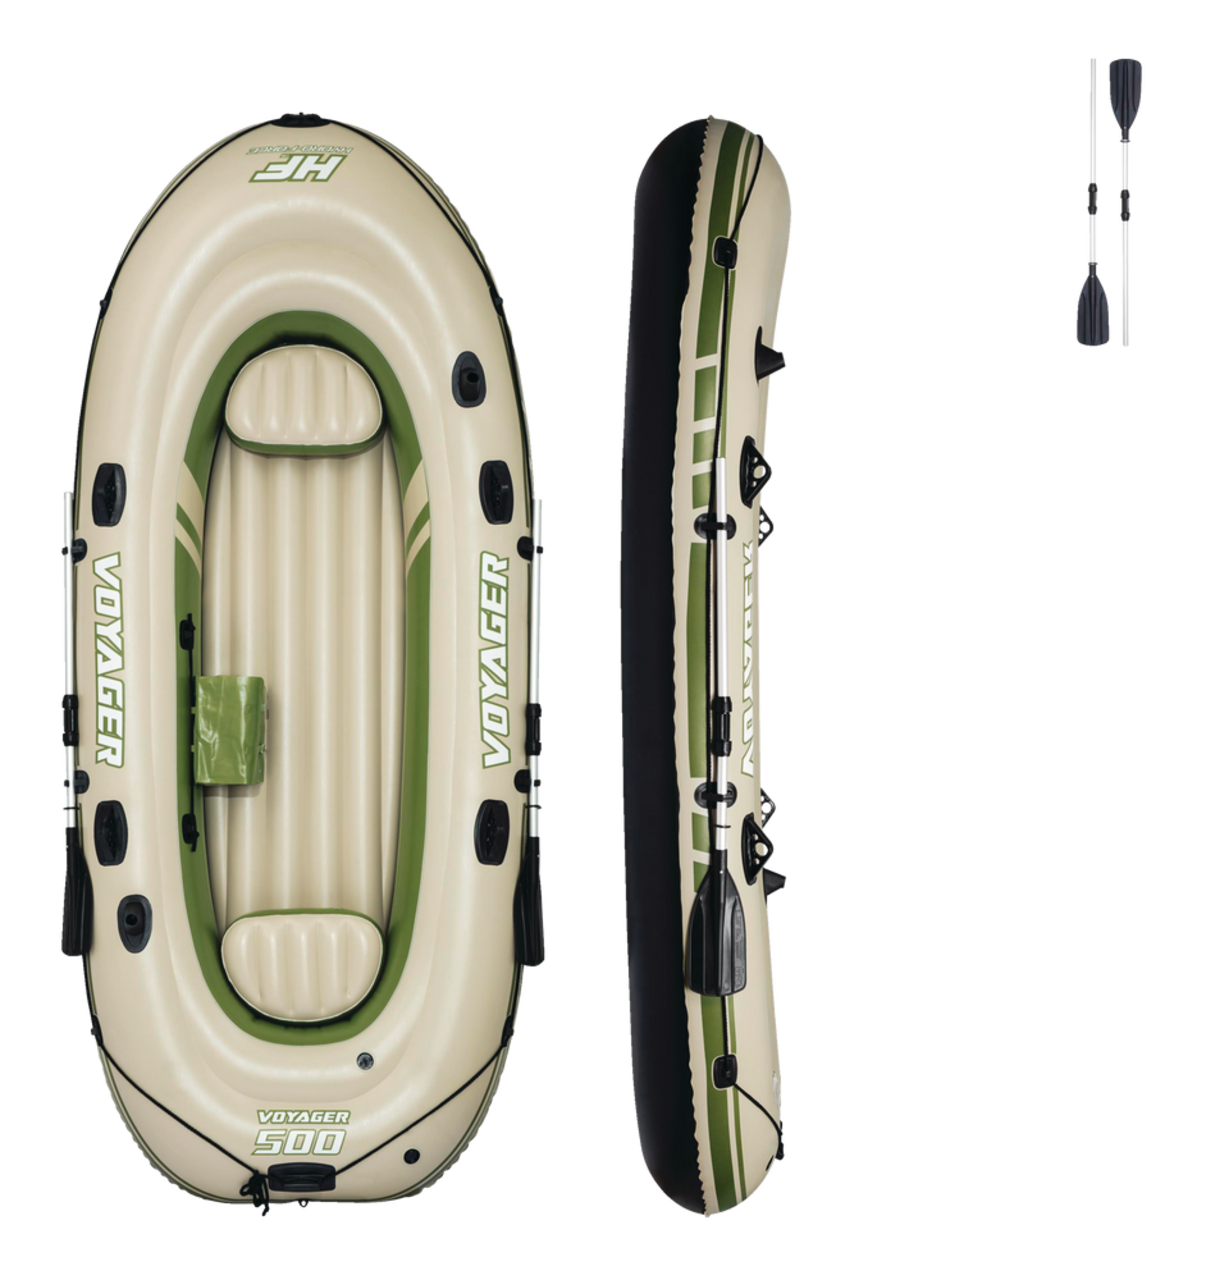 Bestway Hydro-Force Voyager 500 Inflatable River Boat w/Built-in Fishing Rod  Holders, Tan